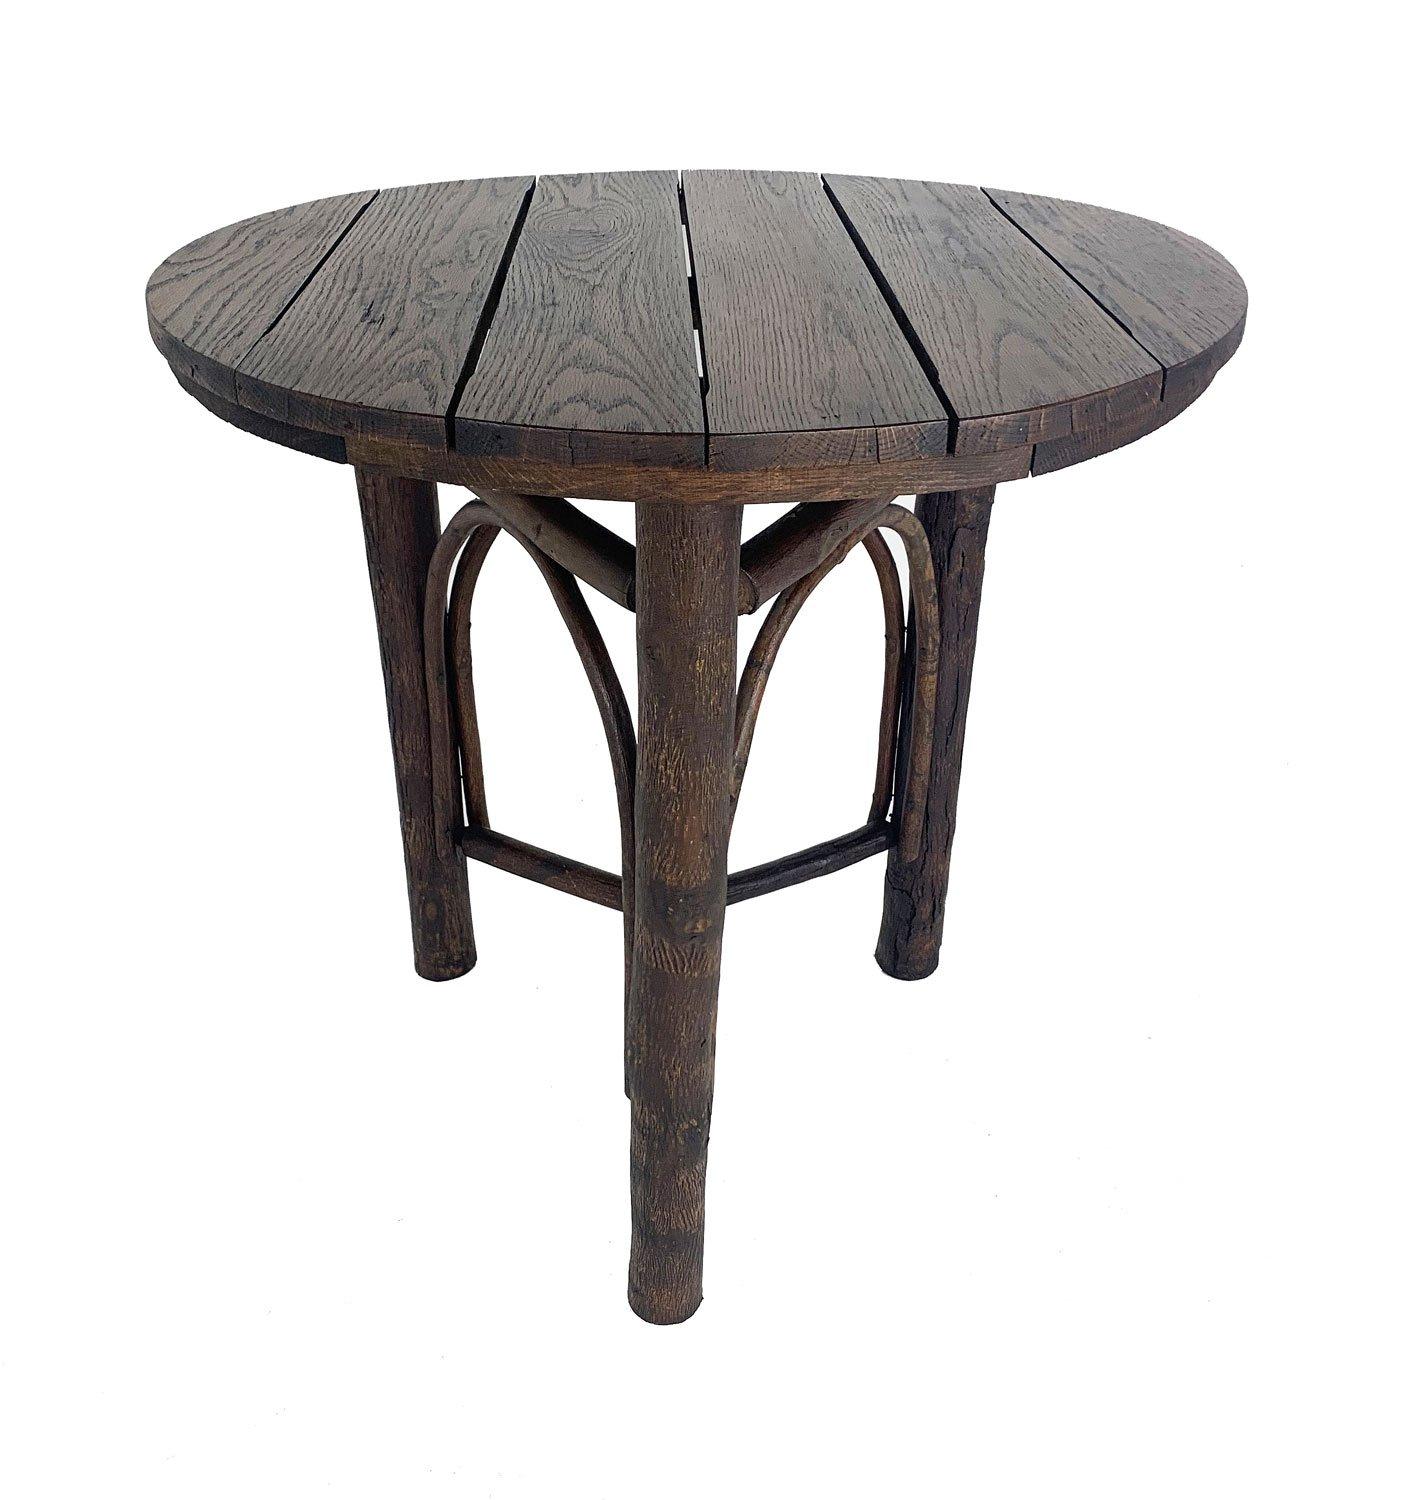 This is a classic Old Hickory table design which was offered in the earliest 1901 Old Hickory Chair Company catalog as the “Rustic 3 Leg Table” and carried throughout the decades by Old Hickory Furniture Company, Martinsville, Indiana. The hickory